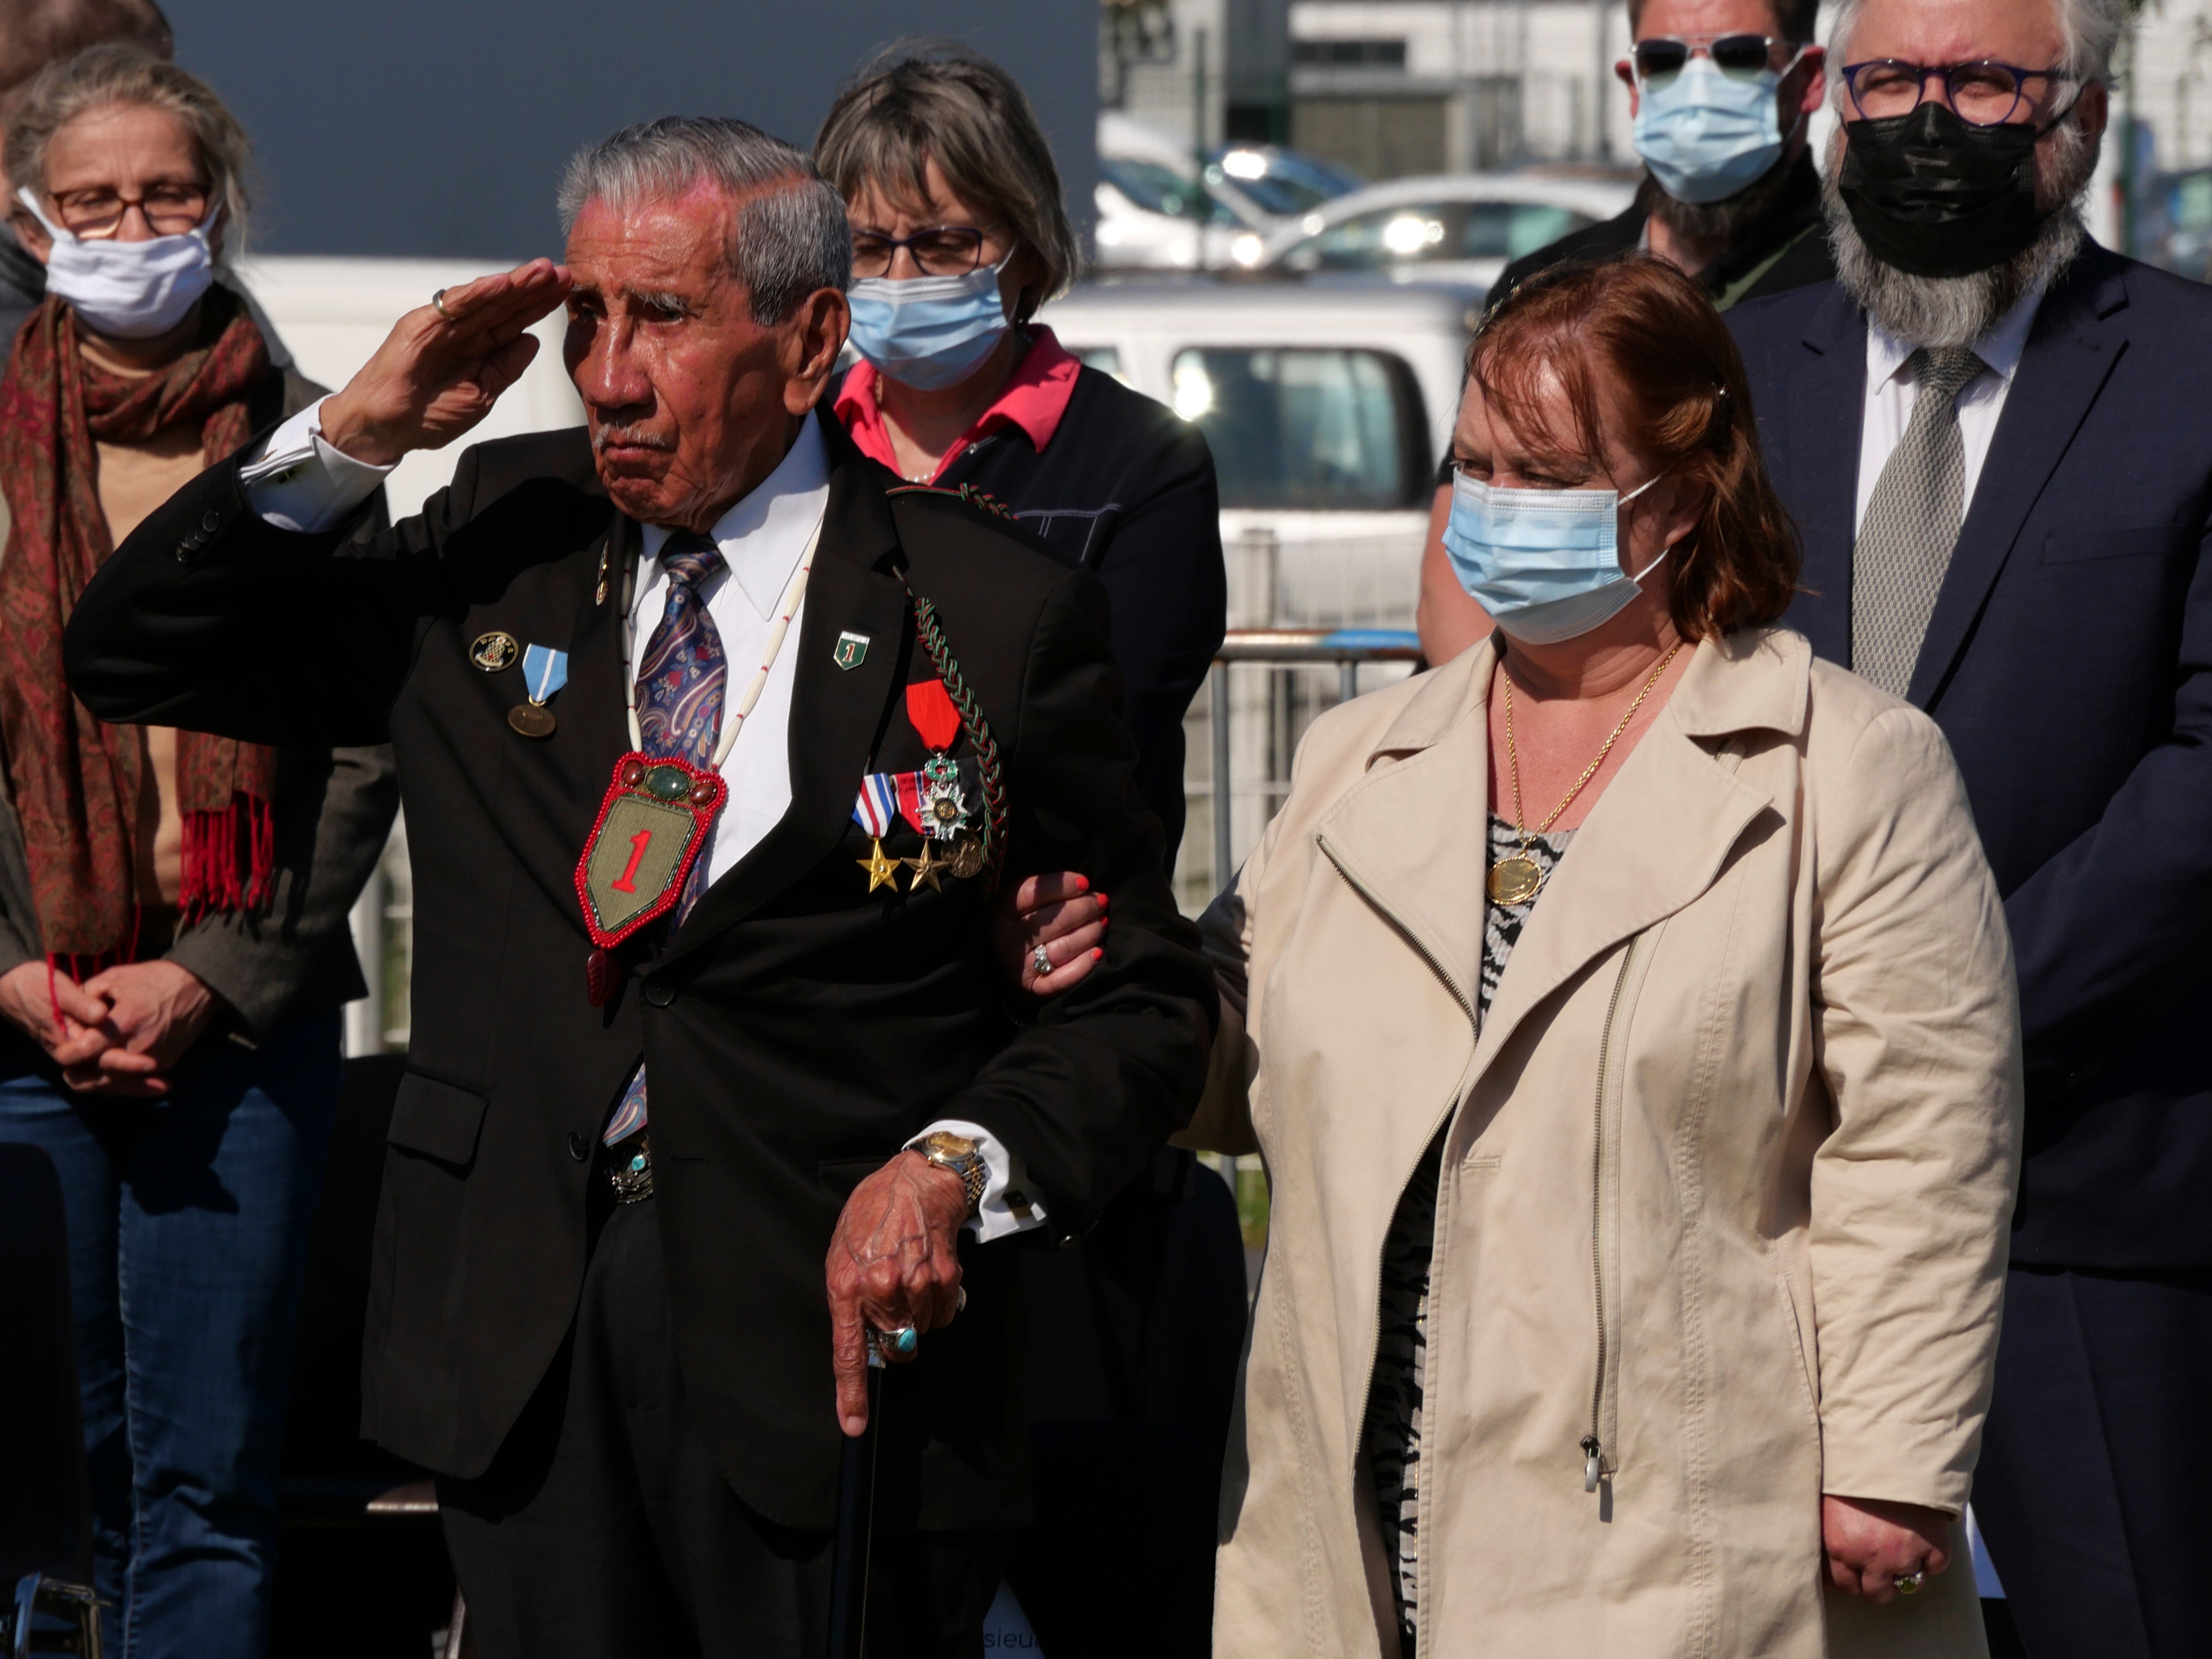 Charles Shay, a 96-year-old native American from Maine, salutes during a D-Day ceremony in Carentan, Normandy